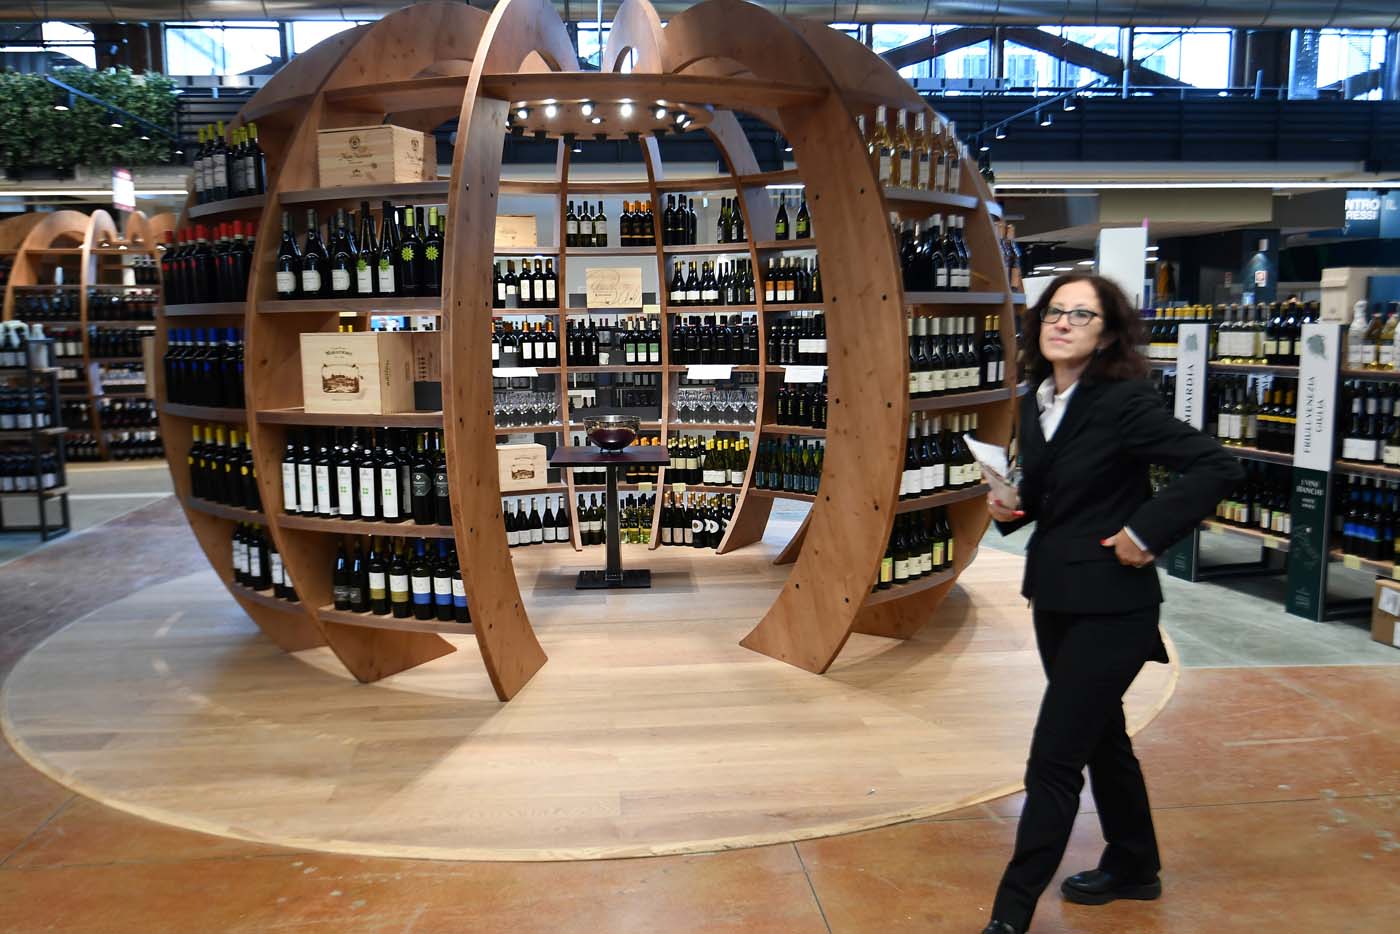 Italian wine is on display at a stand during a press tour at FICO Eataly World agri-food park in Bologna on November 9, 2017. FICO Eataly World, said to be the world's biggest agri-food park, will open to the public on November 15, 2017. The free entry park, widely described as the Disney World of Italian food, is ten hectares big and will enshrine all the Italian food biodiversity. / AFP PHOTO / Vincenzo PINTO